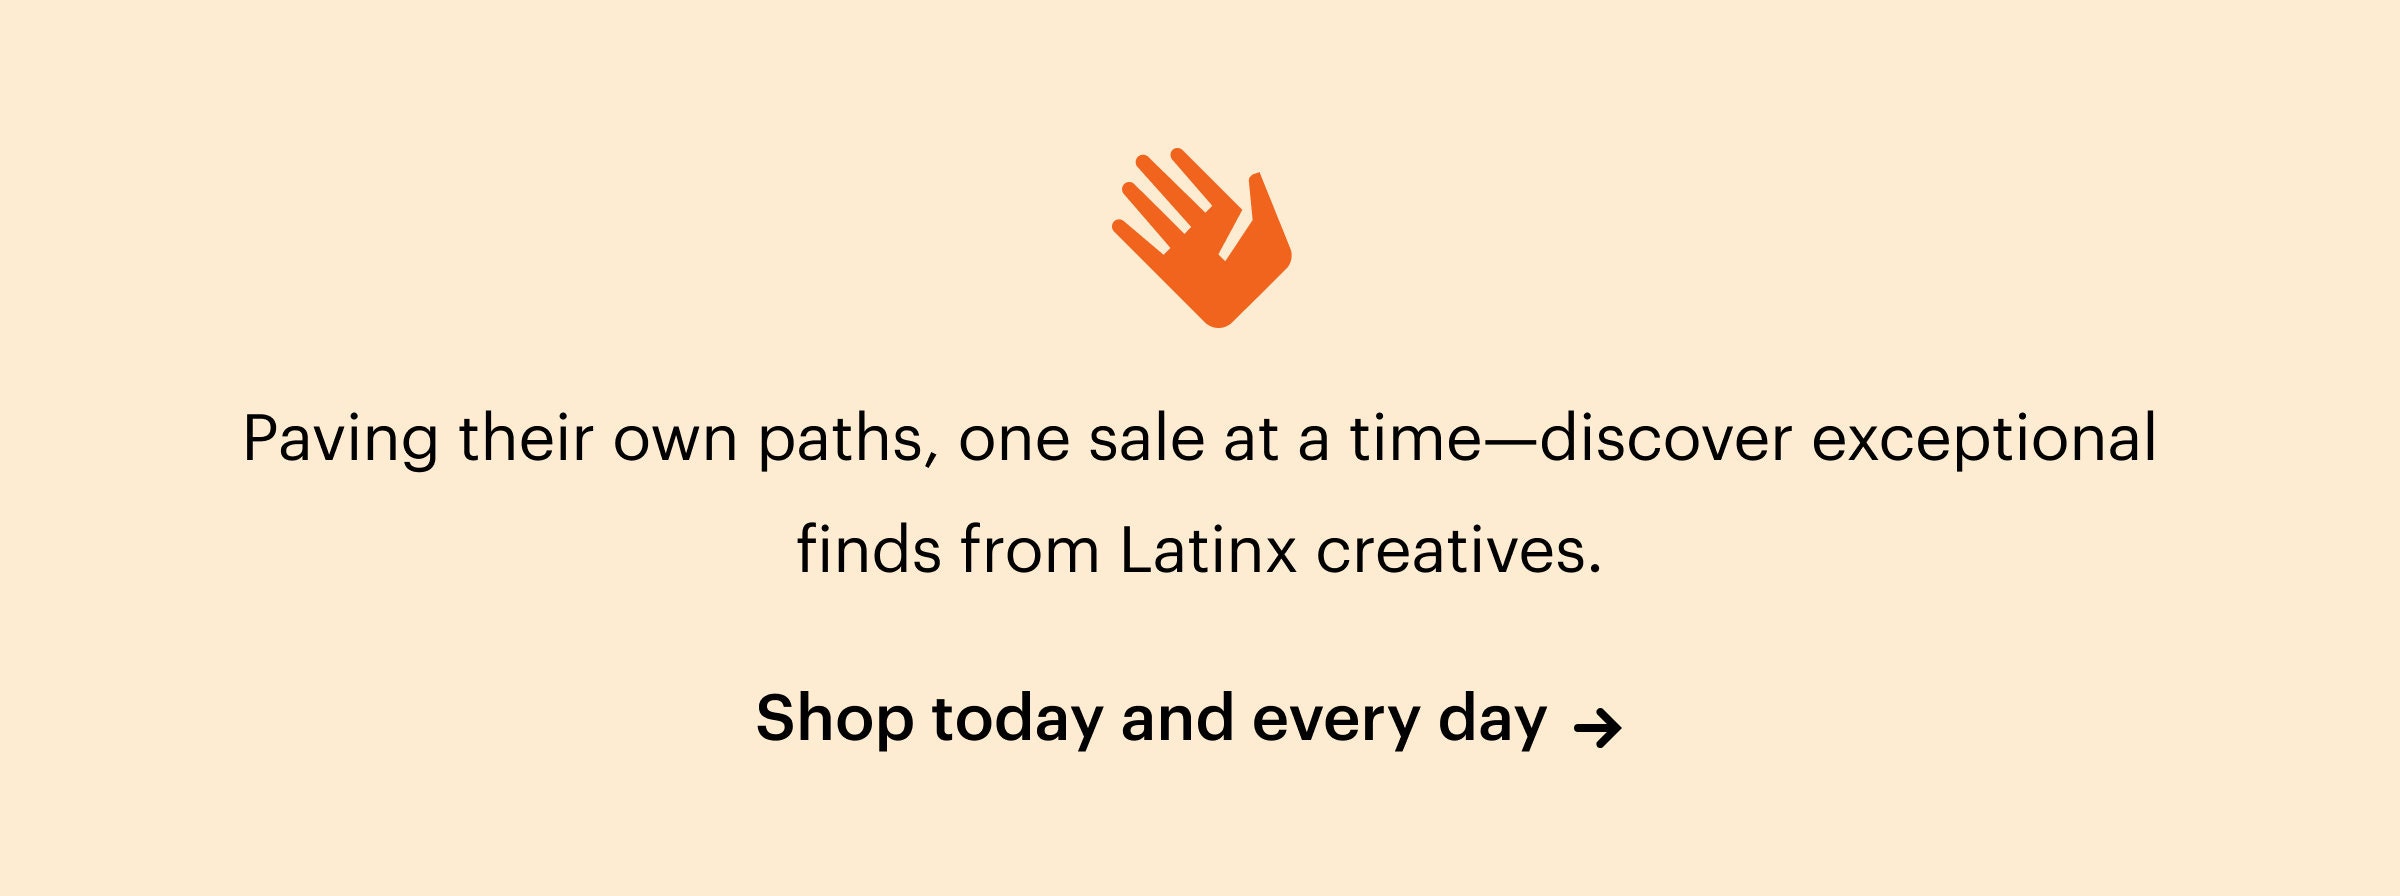 A banner encouraging buyers to shop from more Latinx creatives.